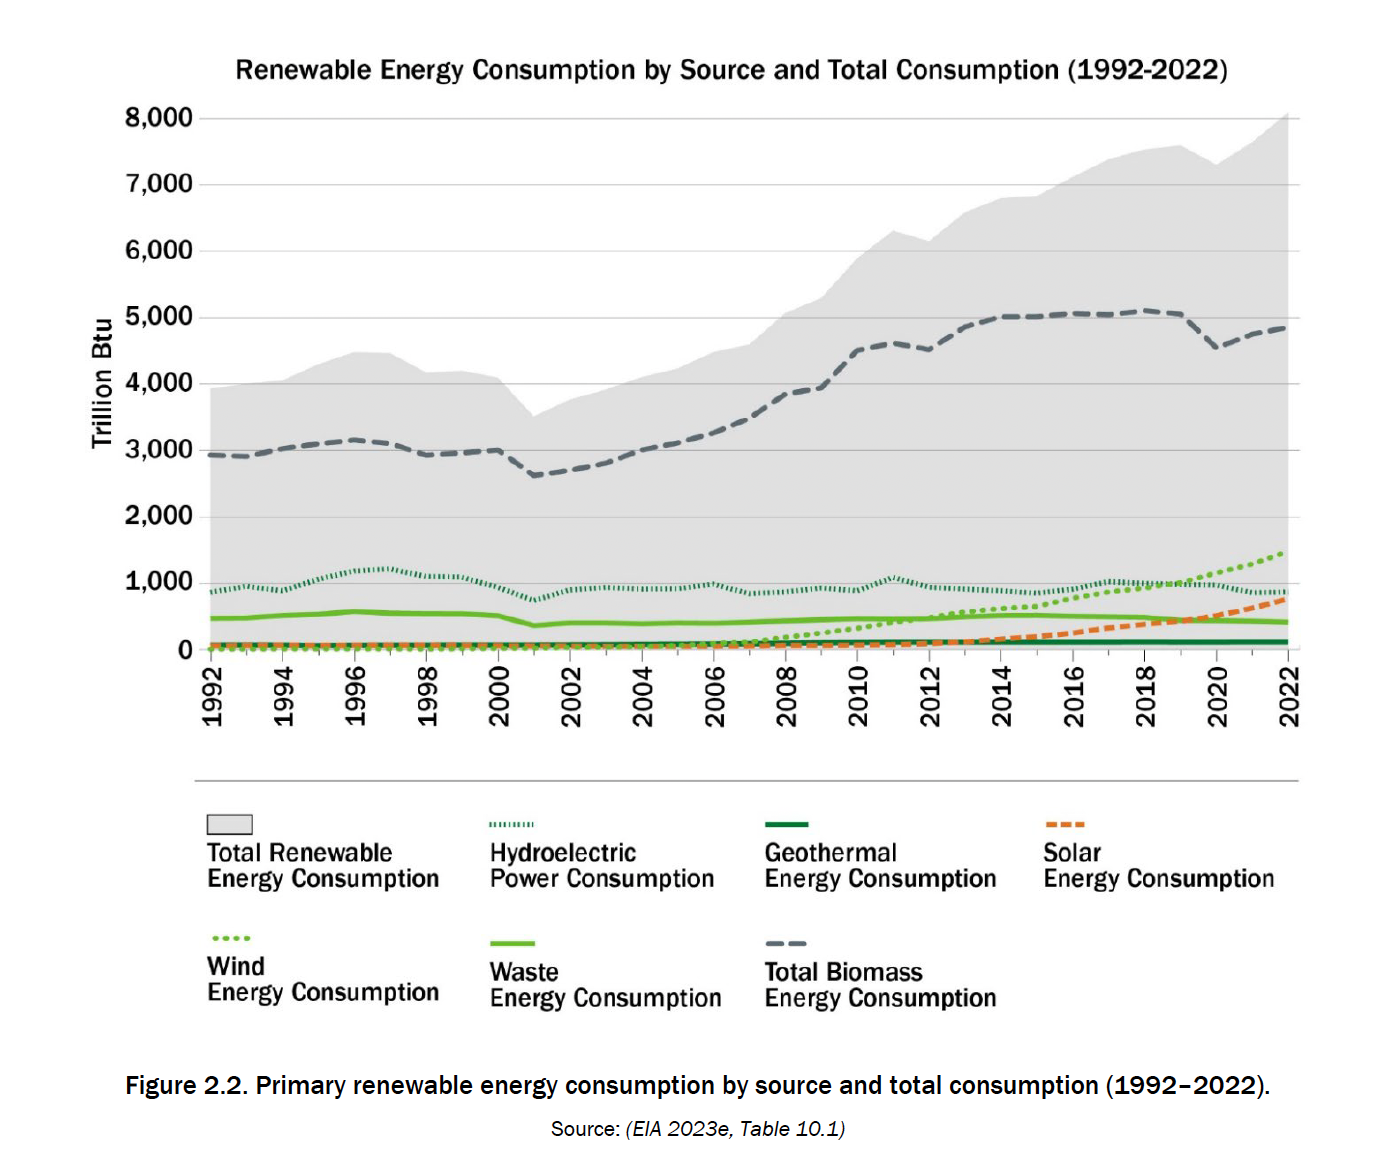 OVERVIEW OF THE STATUS AND PROSPECTS OF THE BIOMASS USE FOR ENERGY IN THE USA